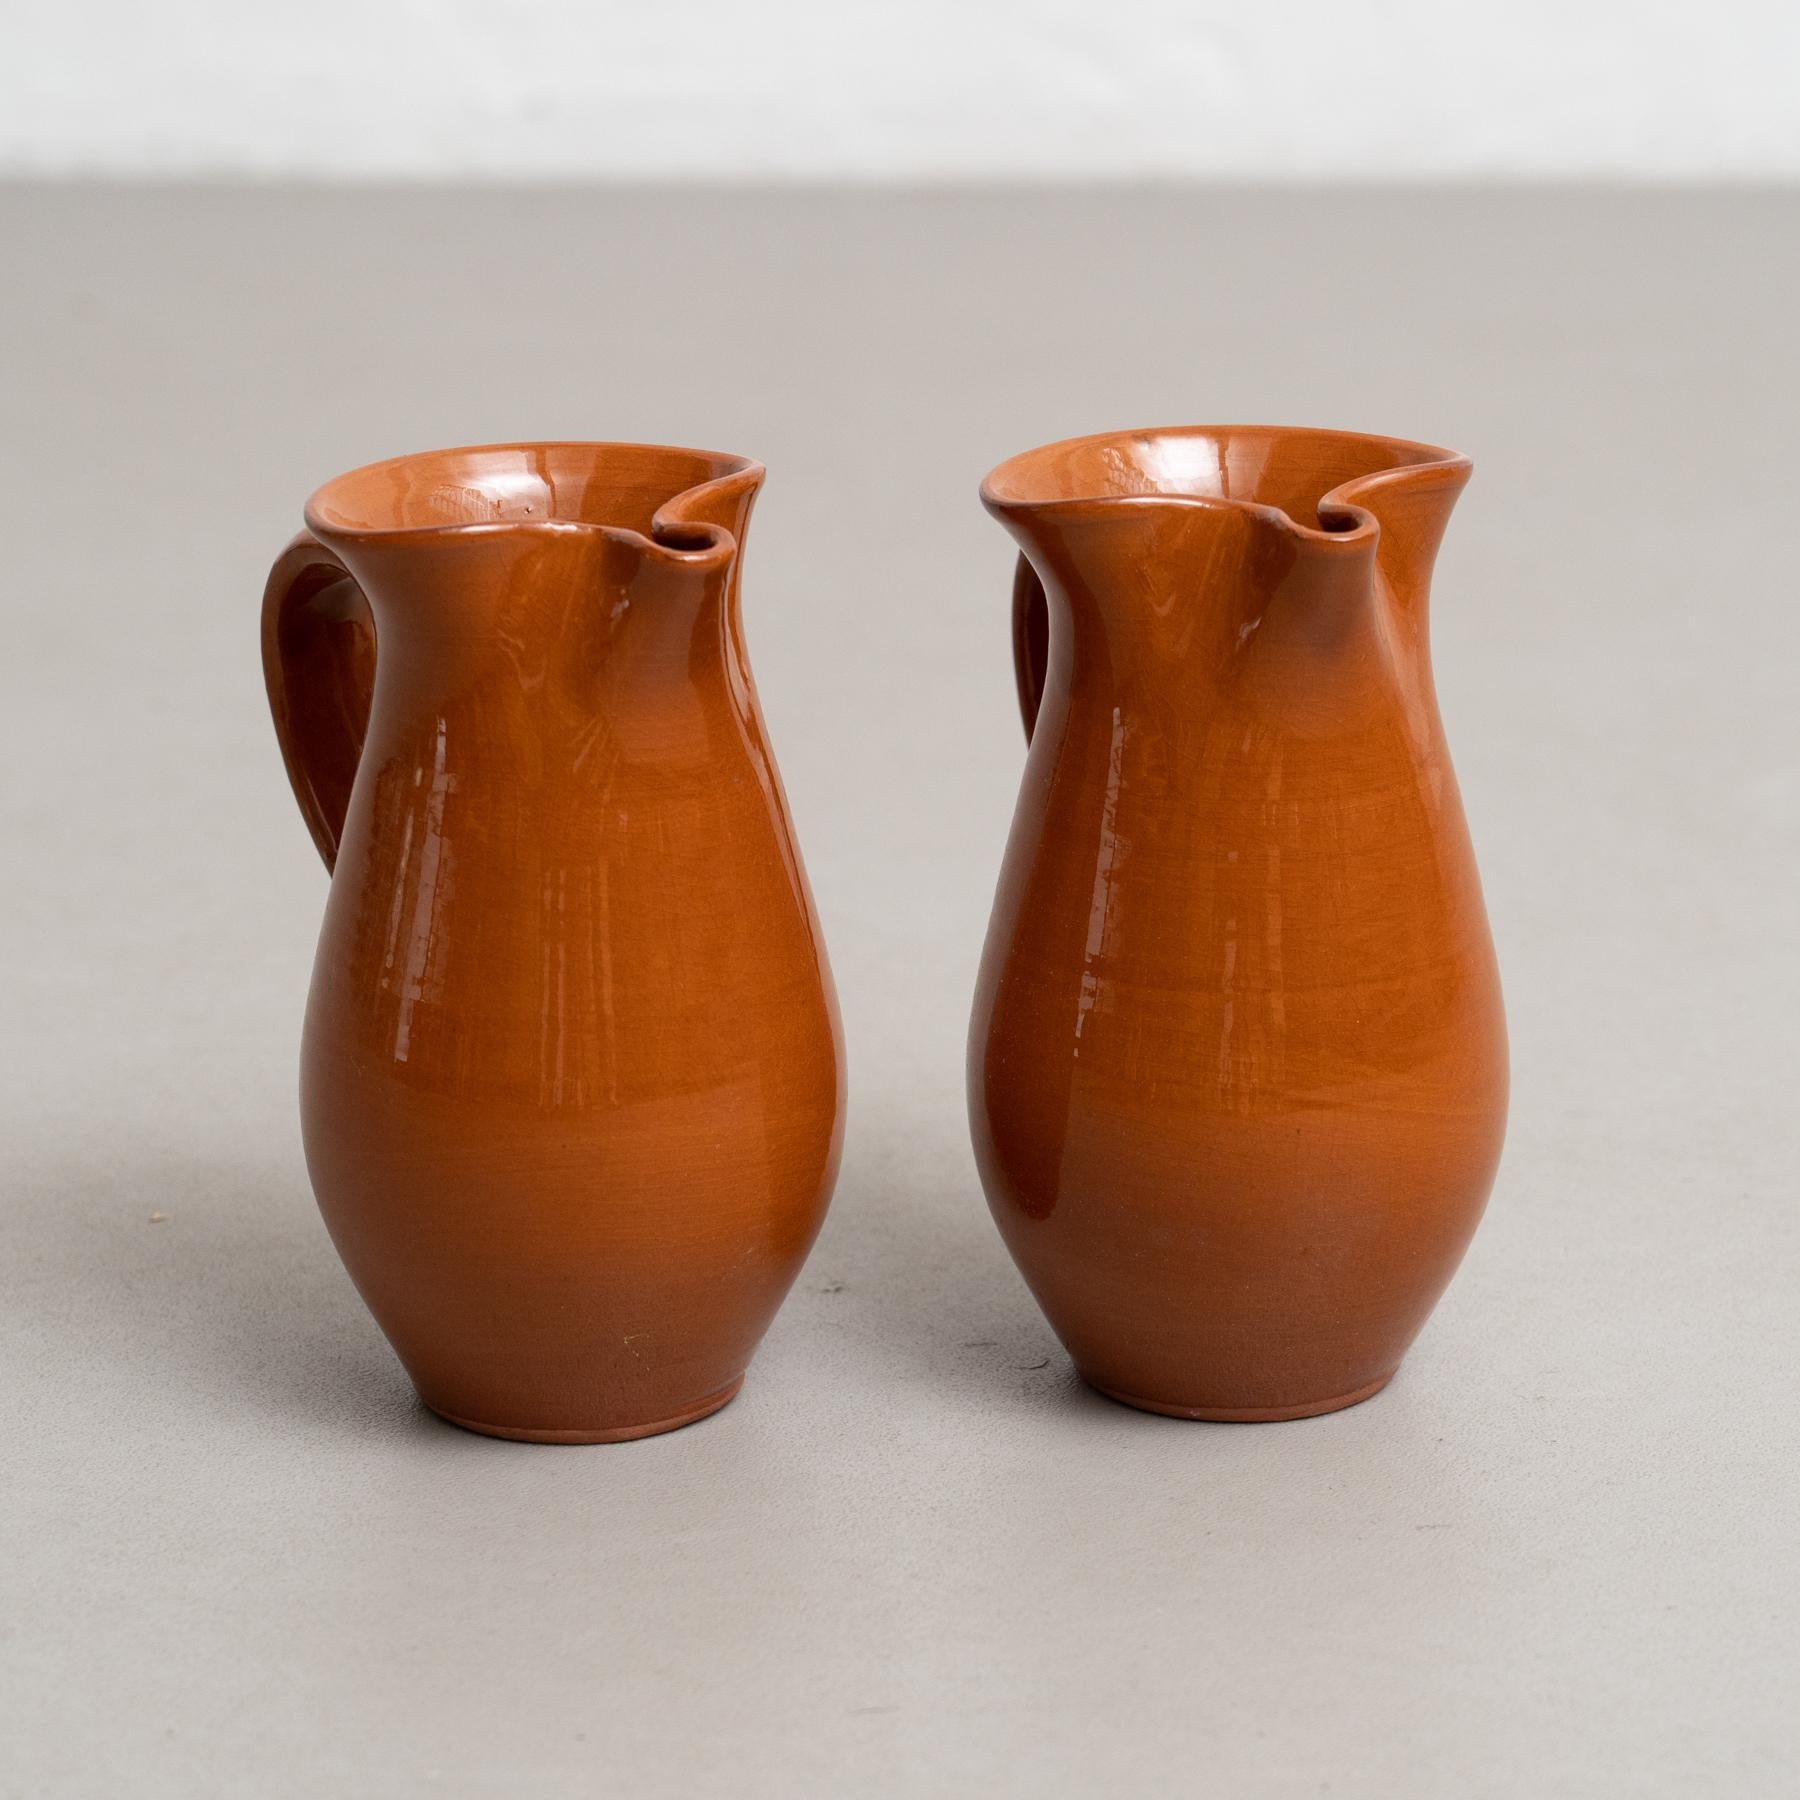 Mid 20th century set of two traditional Spanish ceramic vases.

Manufactured in Spain.

In original condition with minor wear consistent of age and use, preserving a beautiful patina.

Materials: 
Ceramic

Important information regarding color(s) of